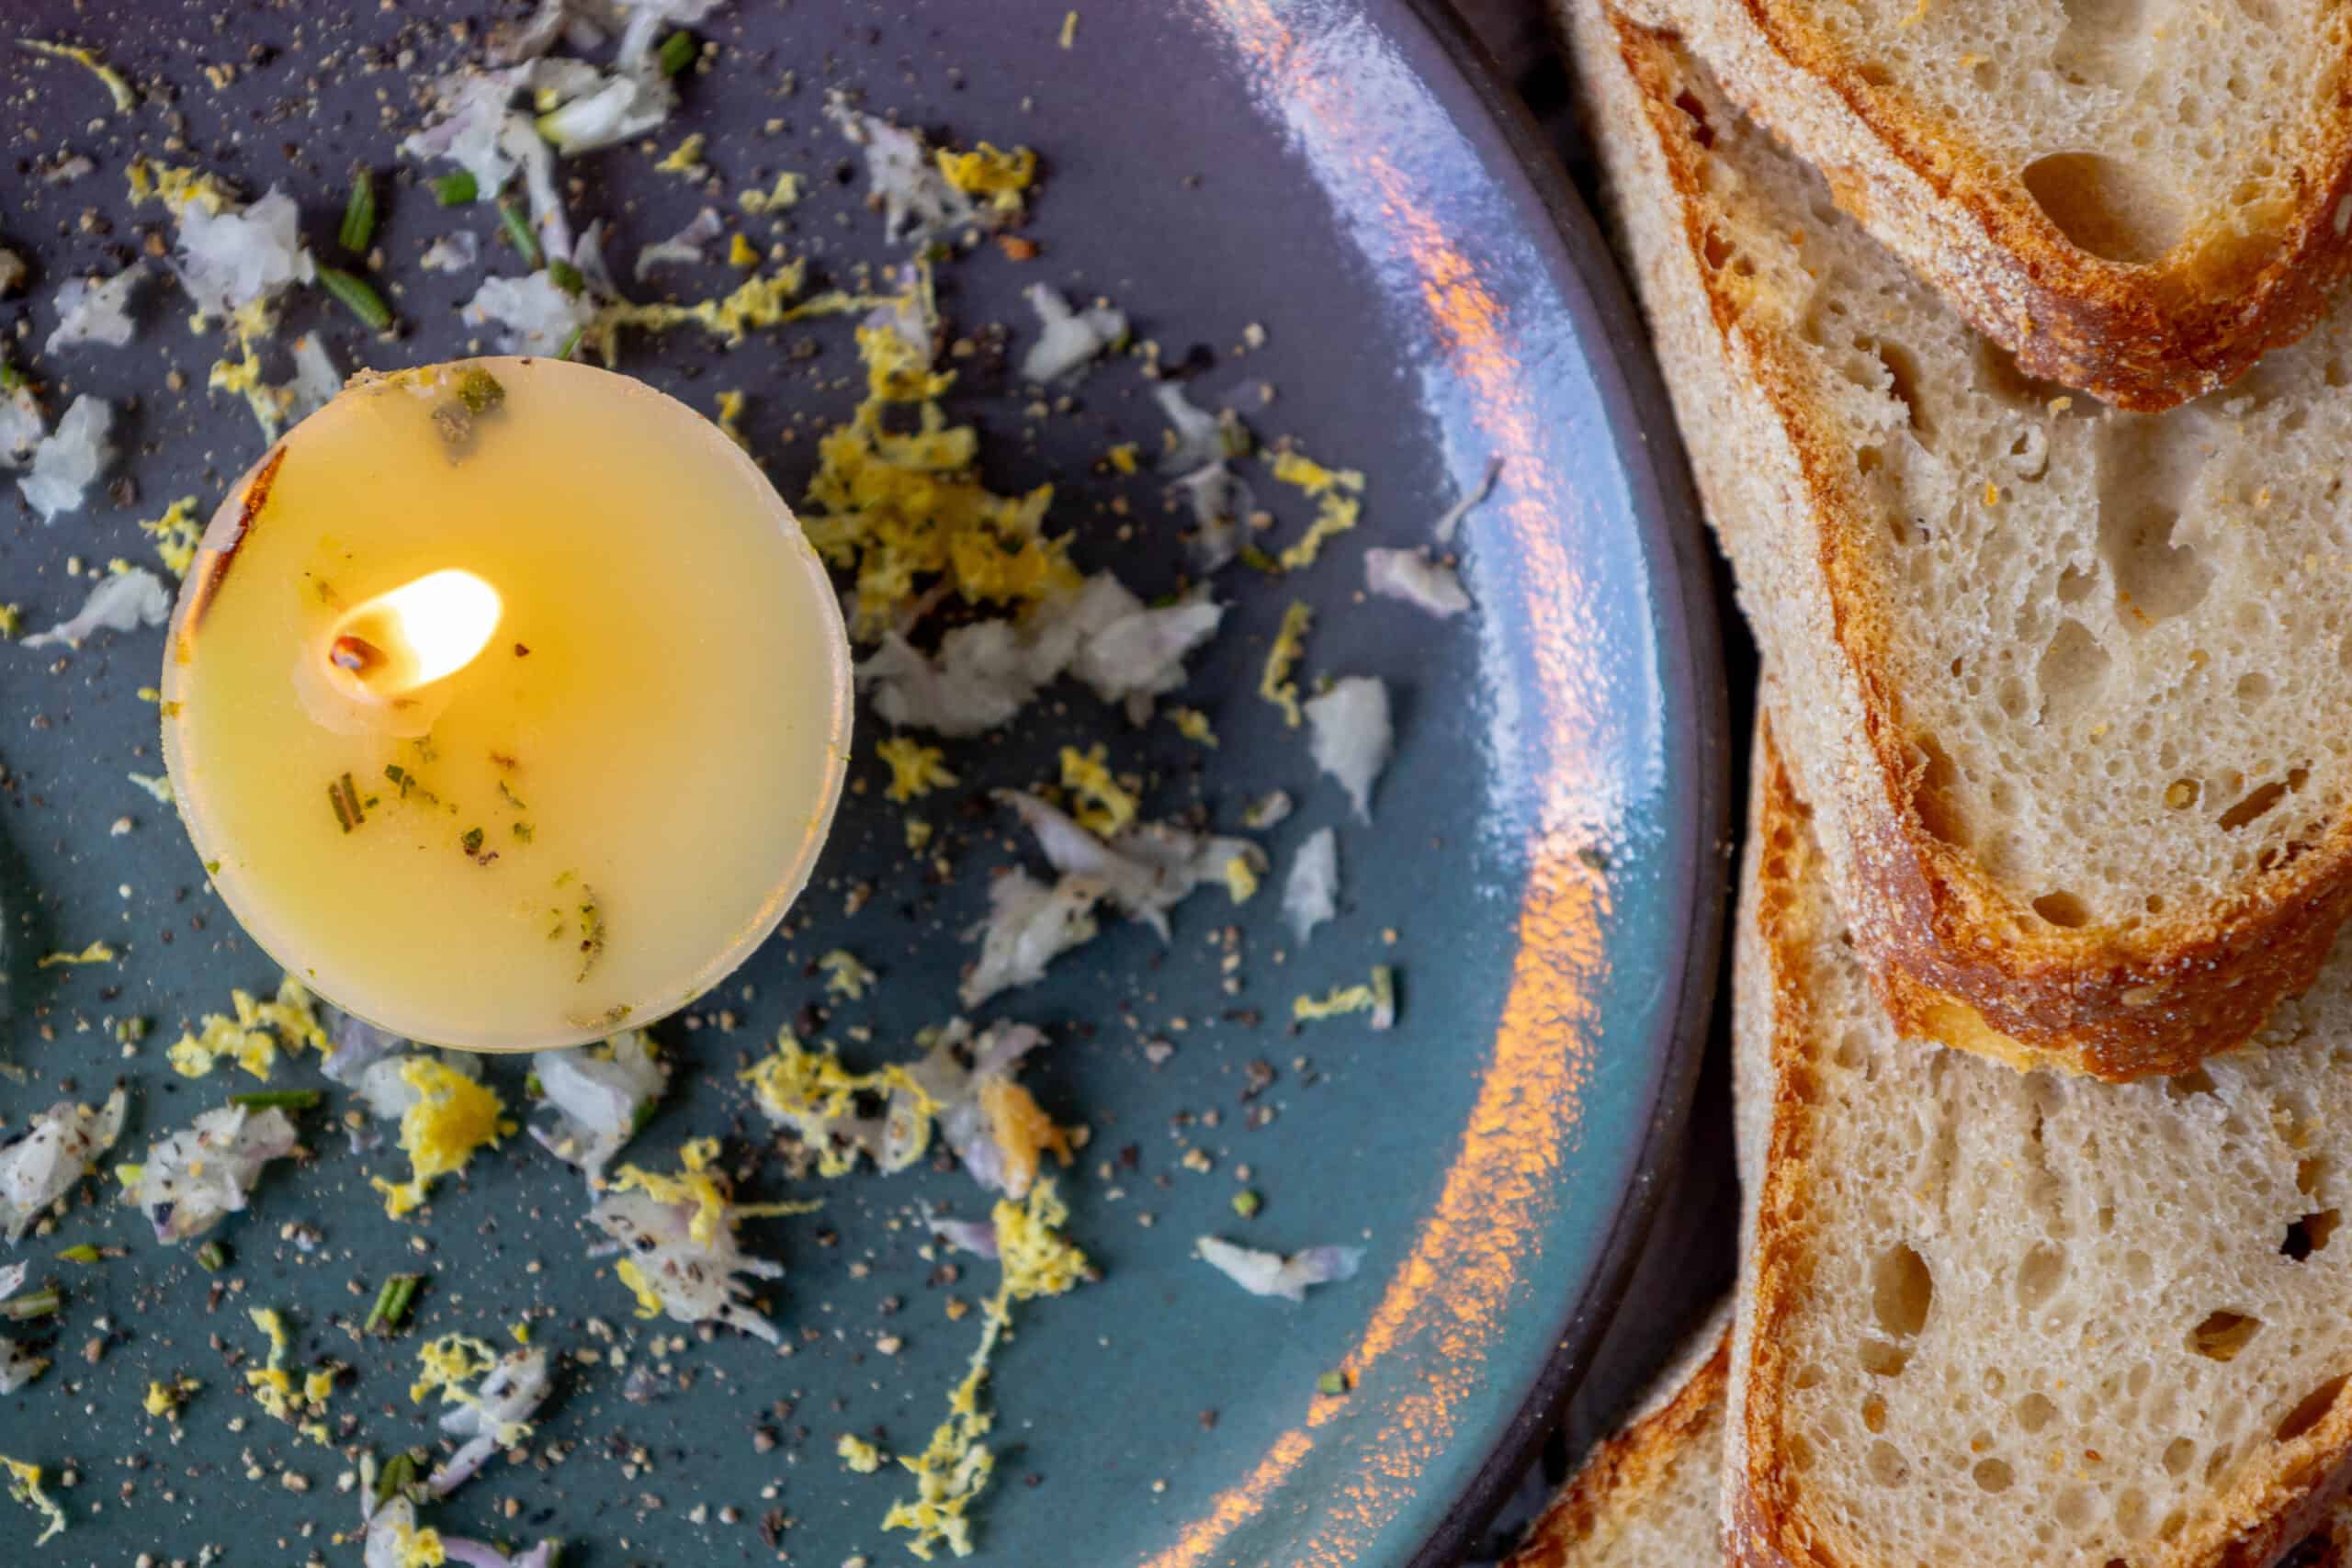 A plate of bread with a tallow candle on it.